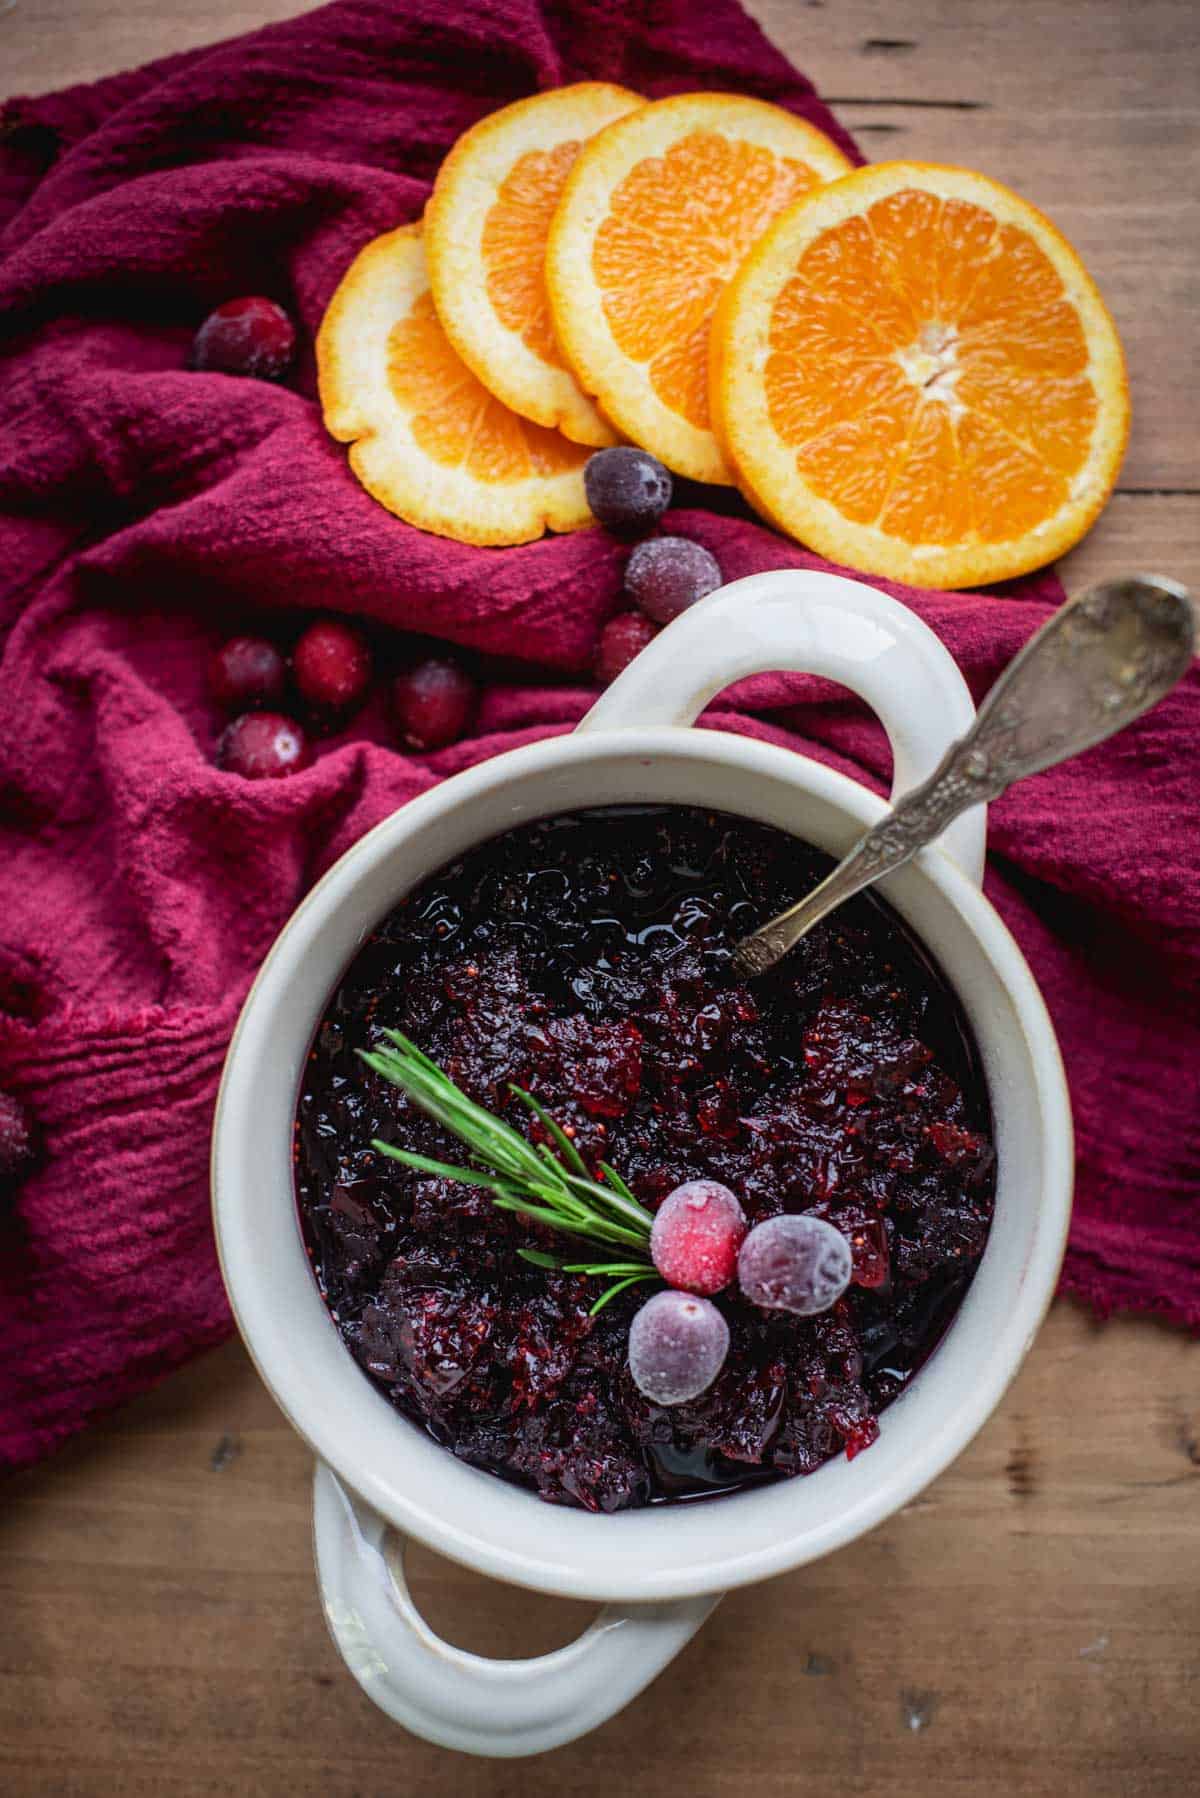 Cranberry Sauce with Grand Marnier in a white bowl with handles. It is sitting on a wooden table draped in red fabric. The sauce is topped with frosted cranberries and some fresh herbs. There are orange slices and extra cranberries scattered on the table.